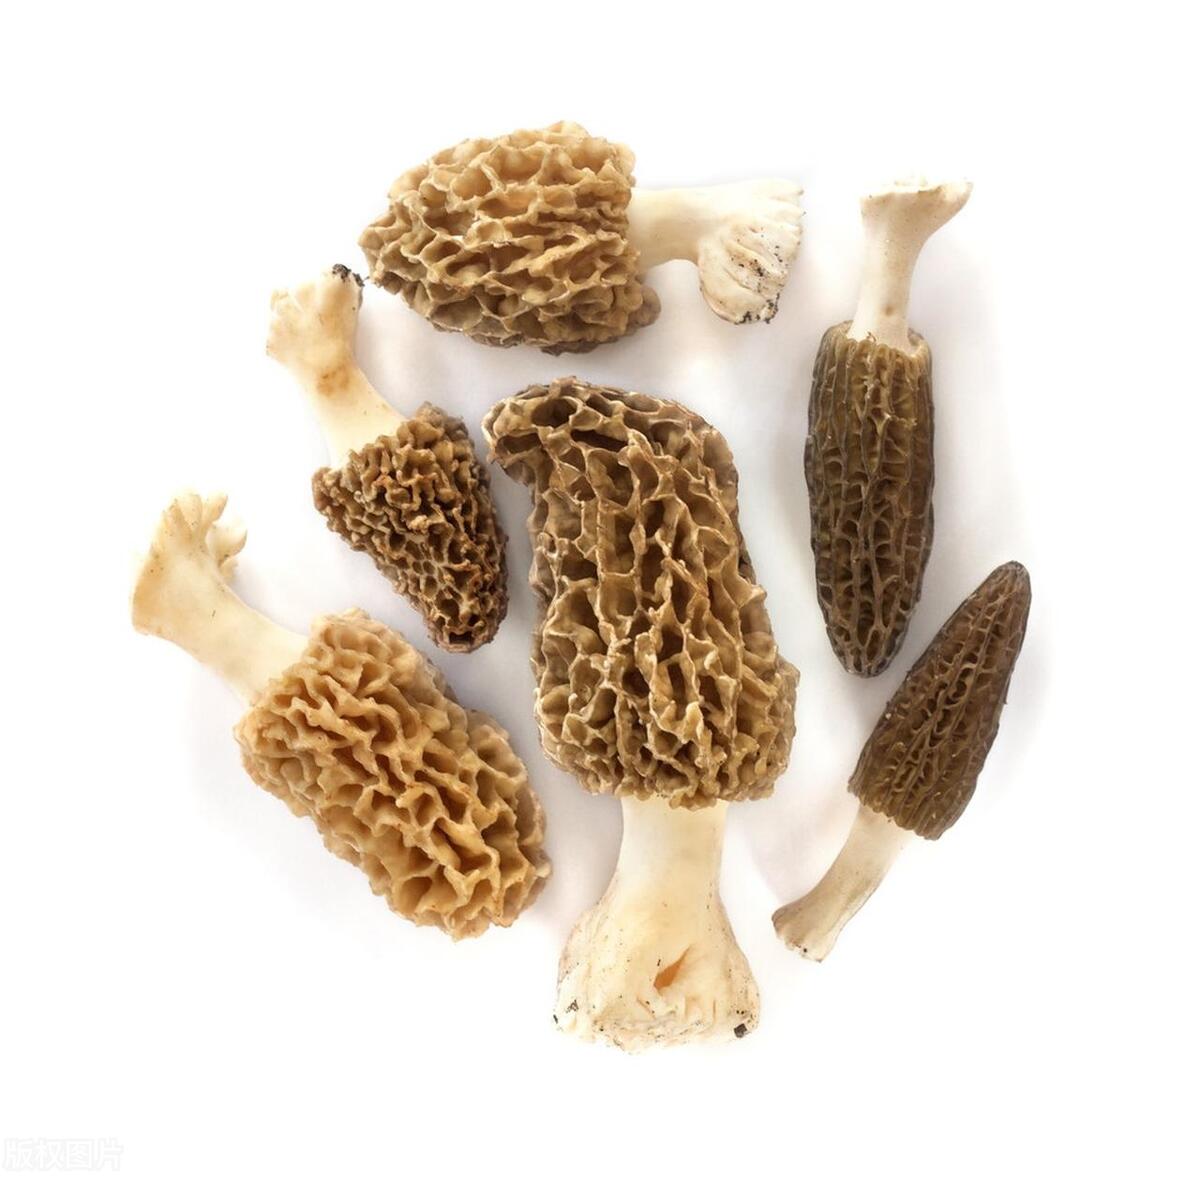 From North to South: Regional Morel Mushrooms Culinary Delights